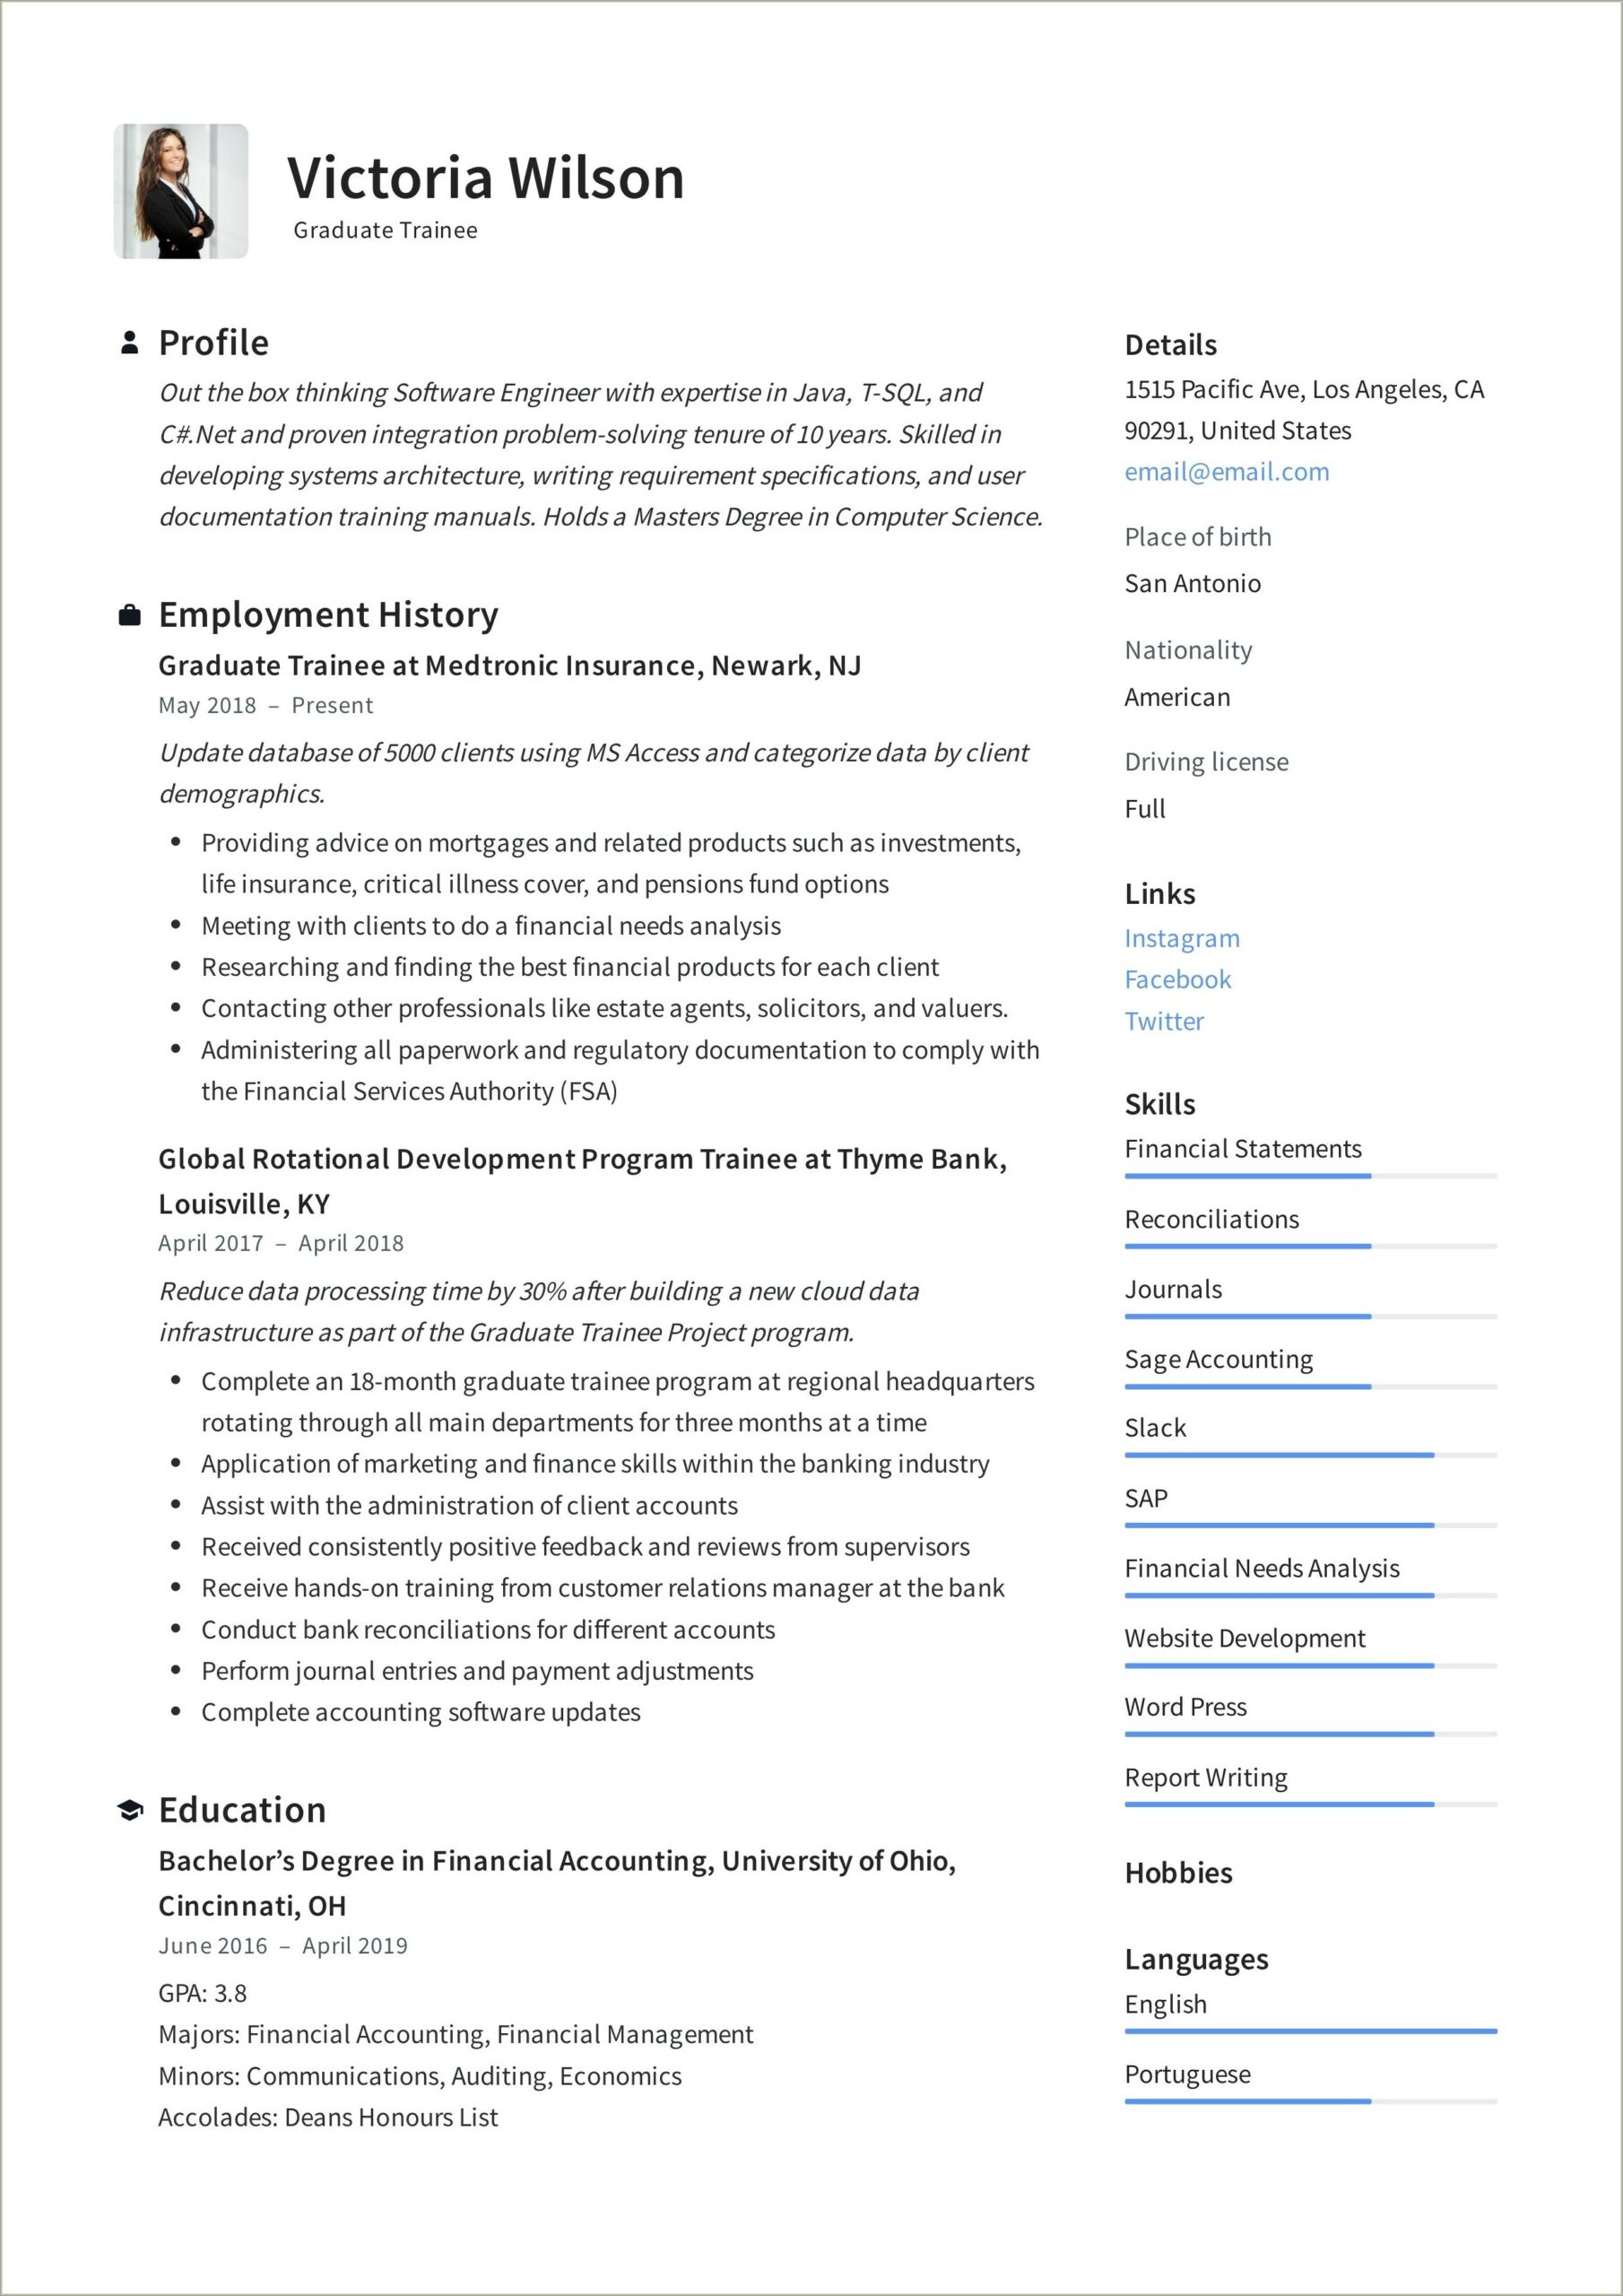 Sample Resume With Bachelors And Masters Degrees